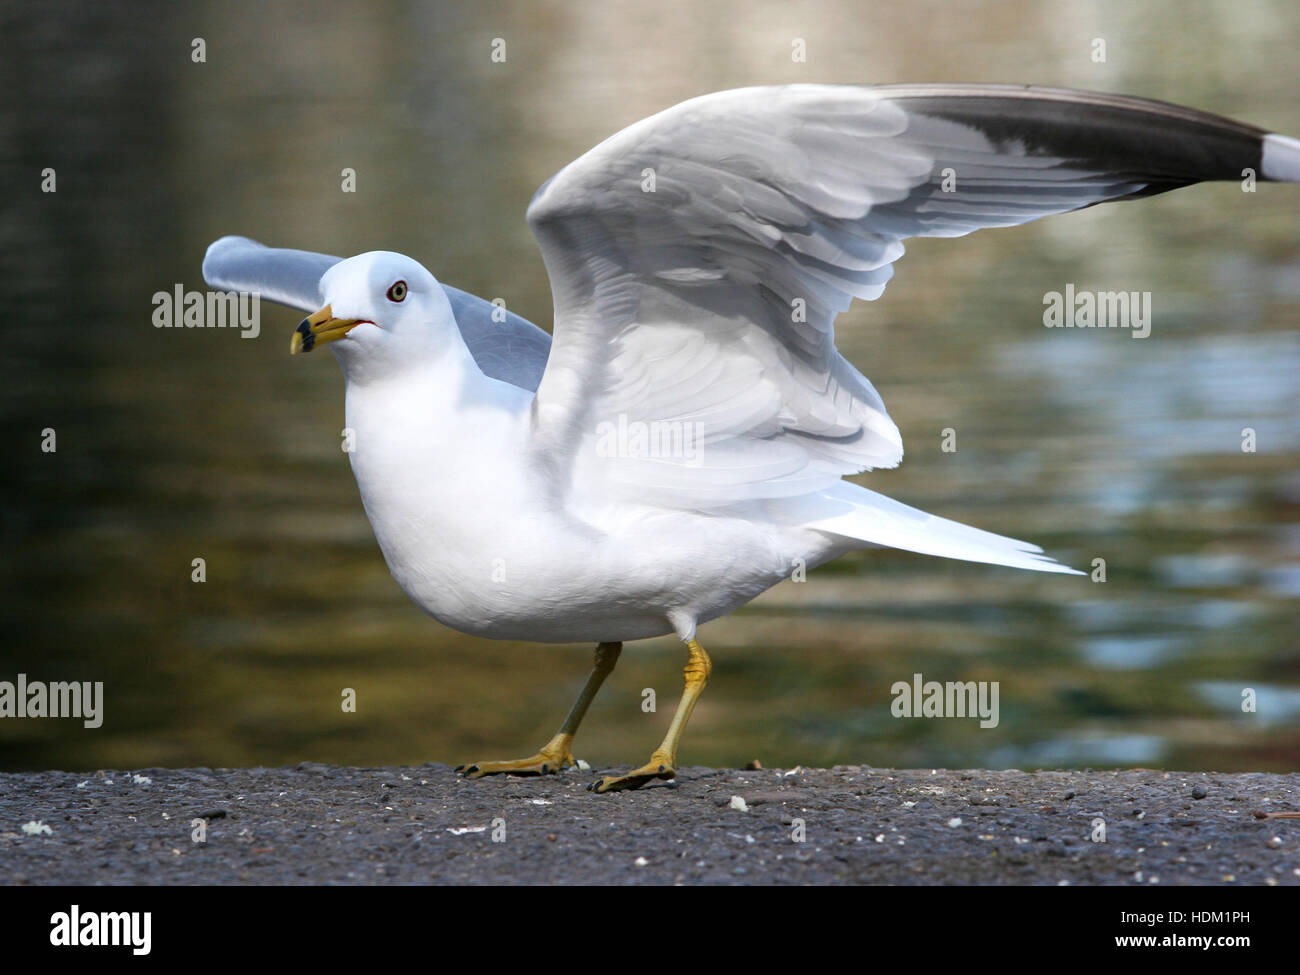 Ring-billed Gull with outstretched wings Stock Photo